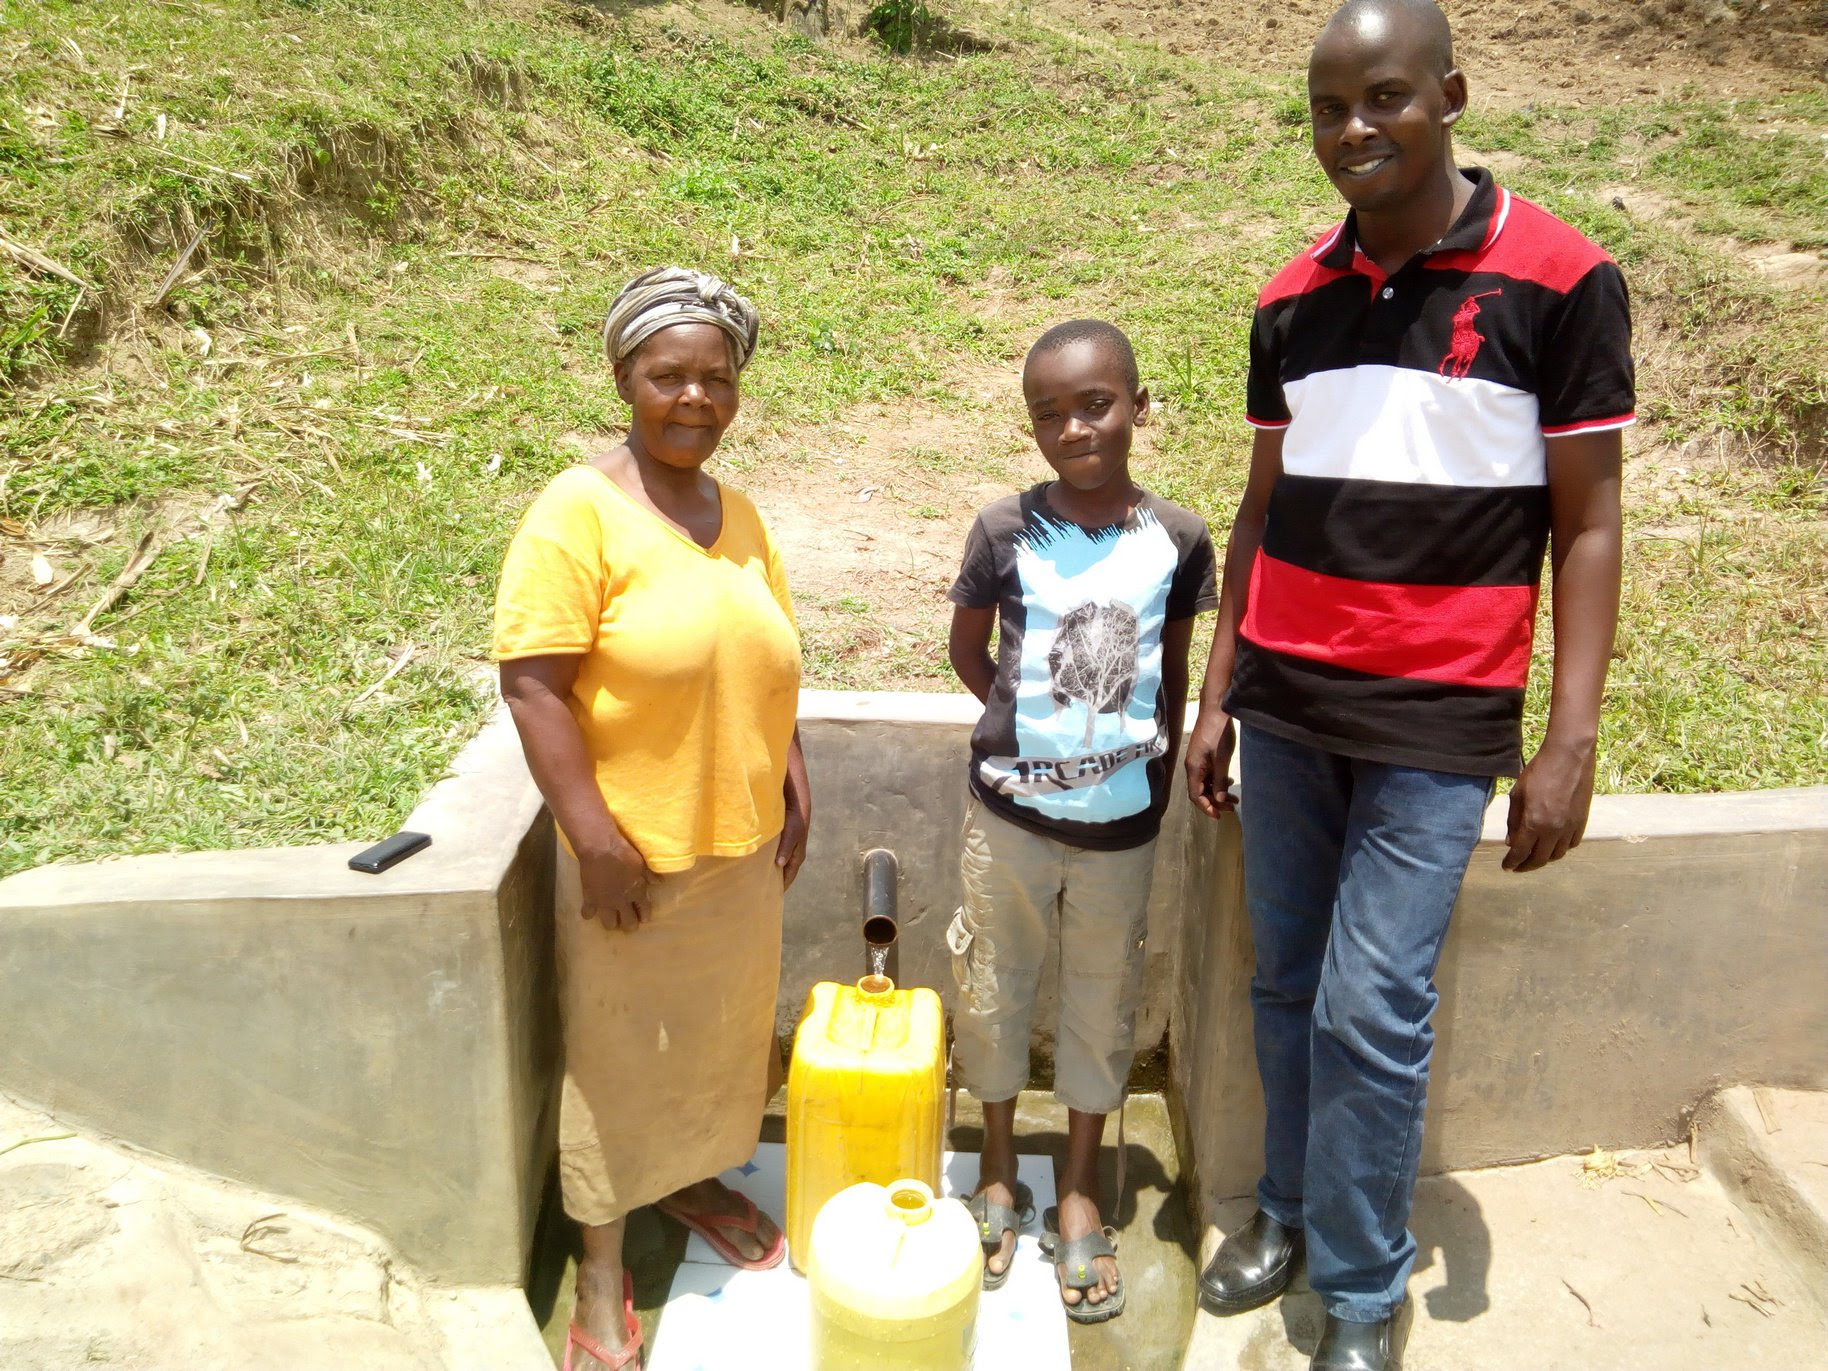 NEW update from the Water Project in Kenya – Handidi Community